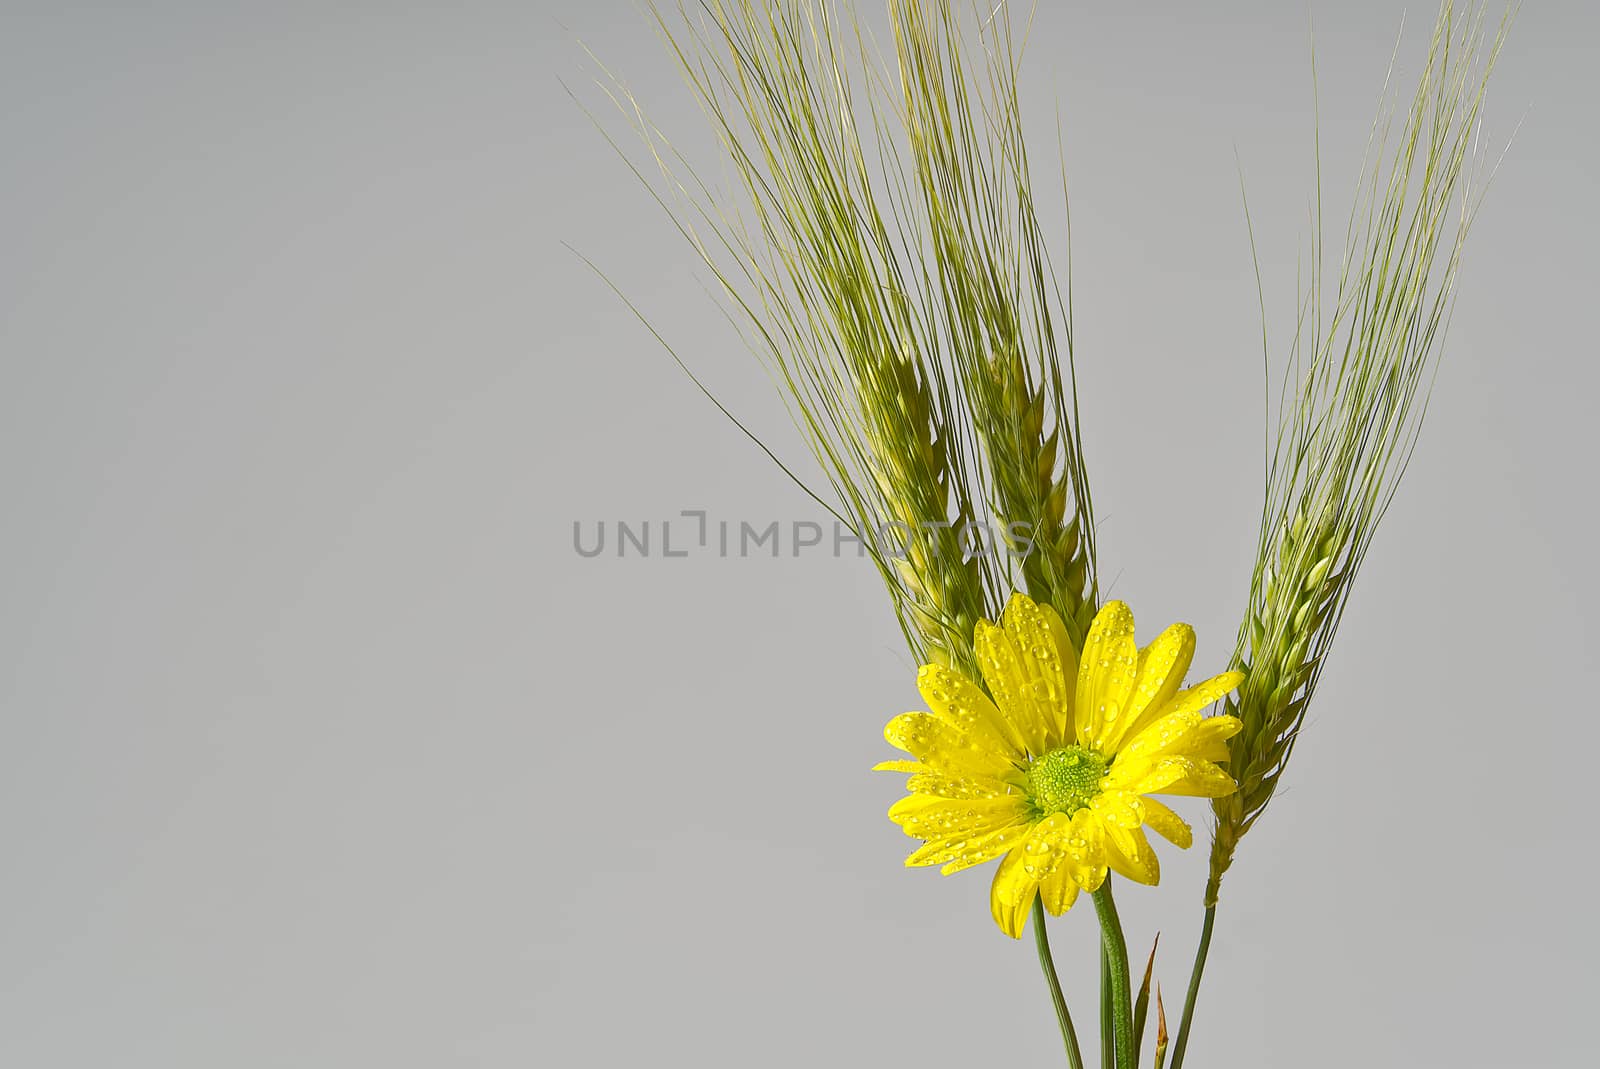 Single fresh yellow chrysanthemum with green wheat, close-up shot, yellow daisies flowers isolated on grey